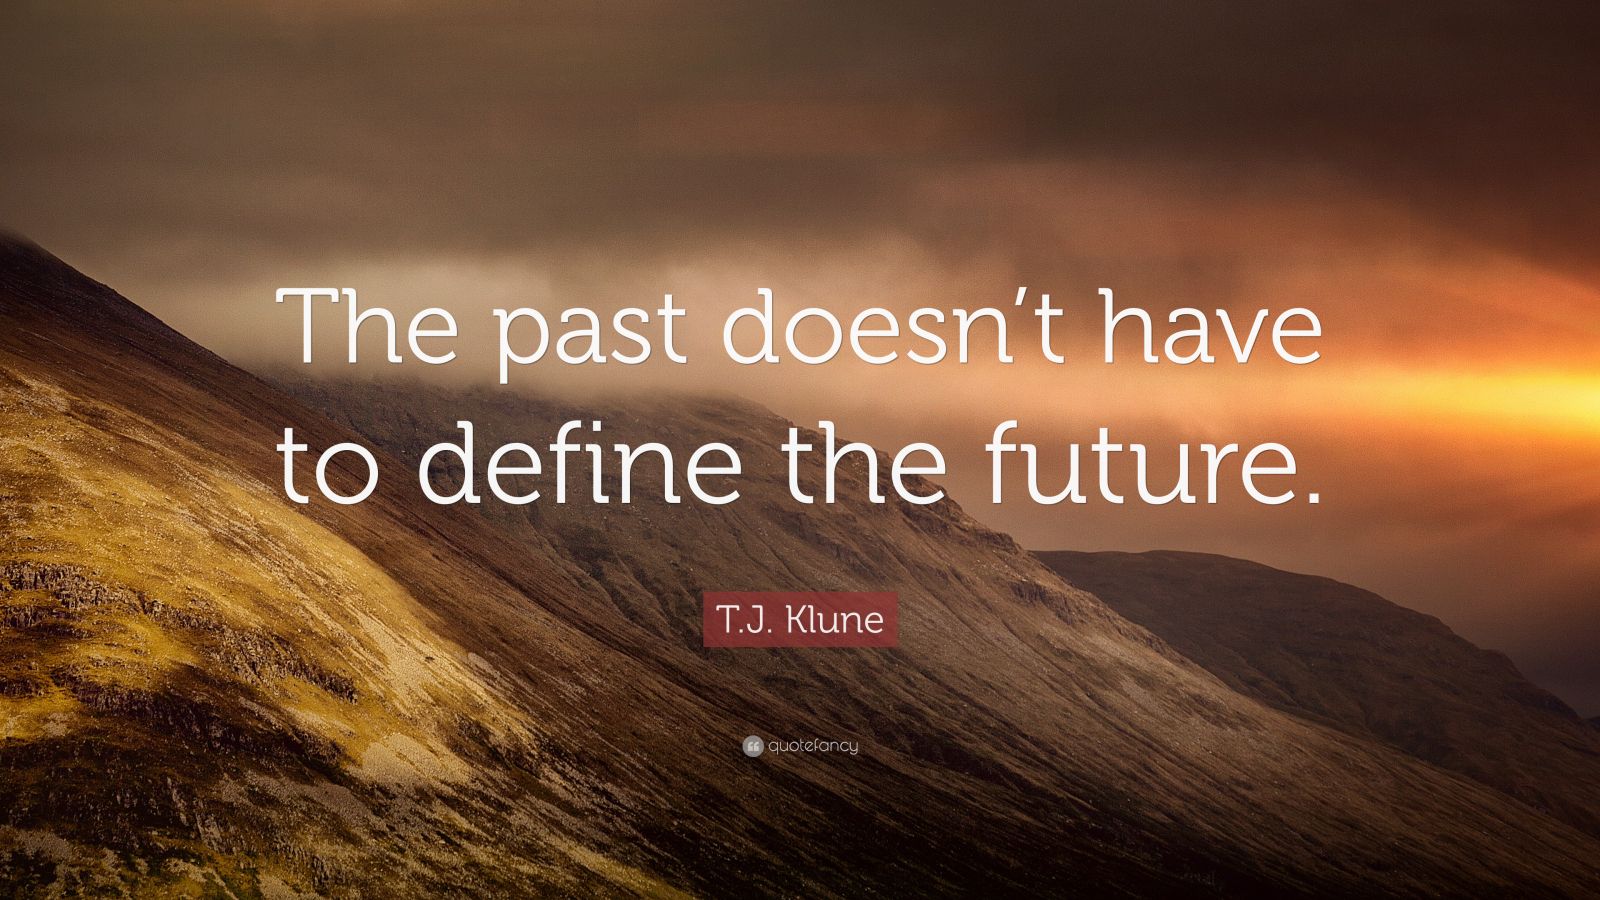 T.J. Klune Quote: “The past doesn’t have to define the future.”